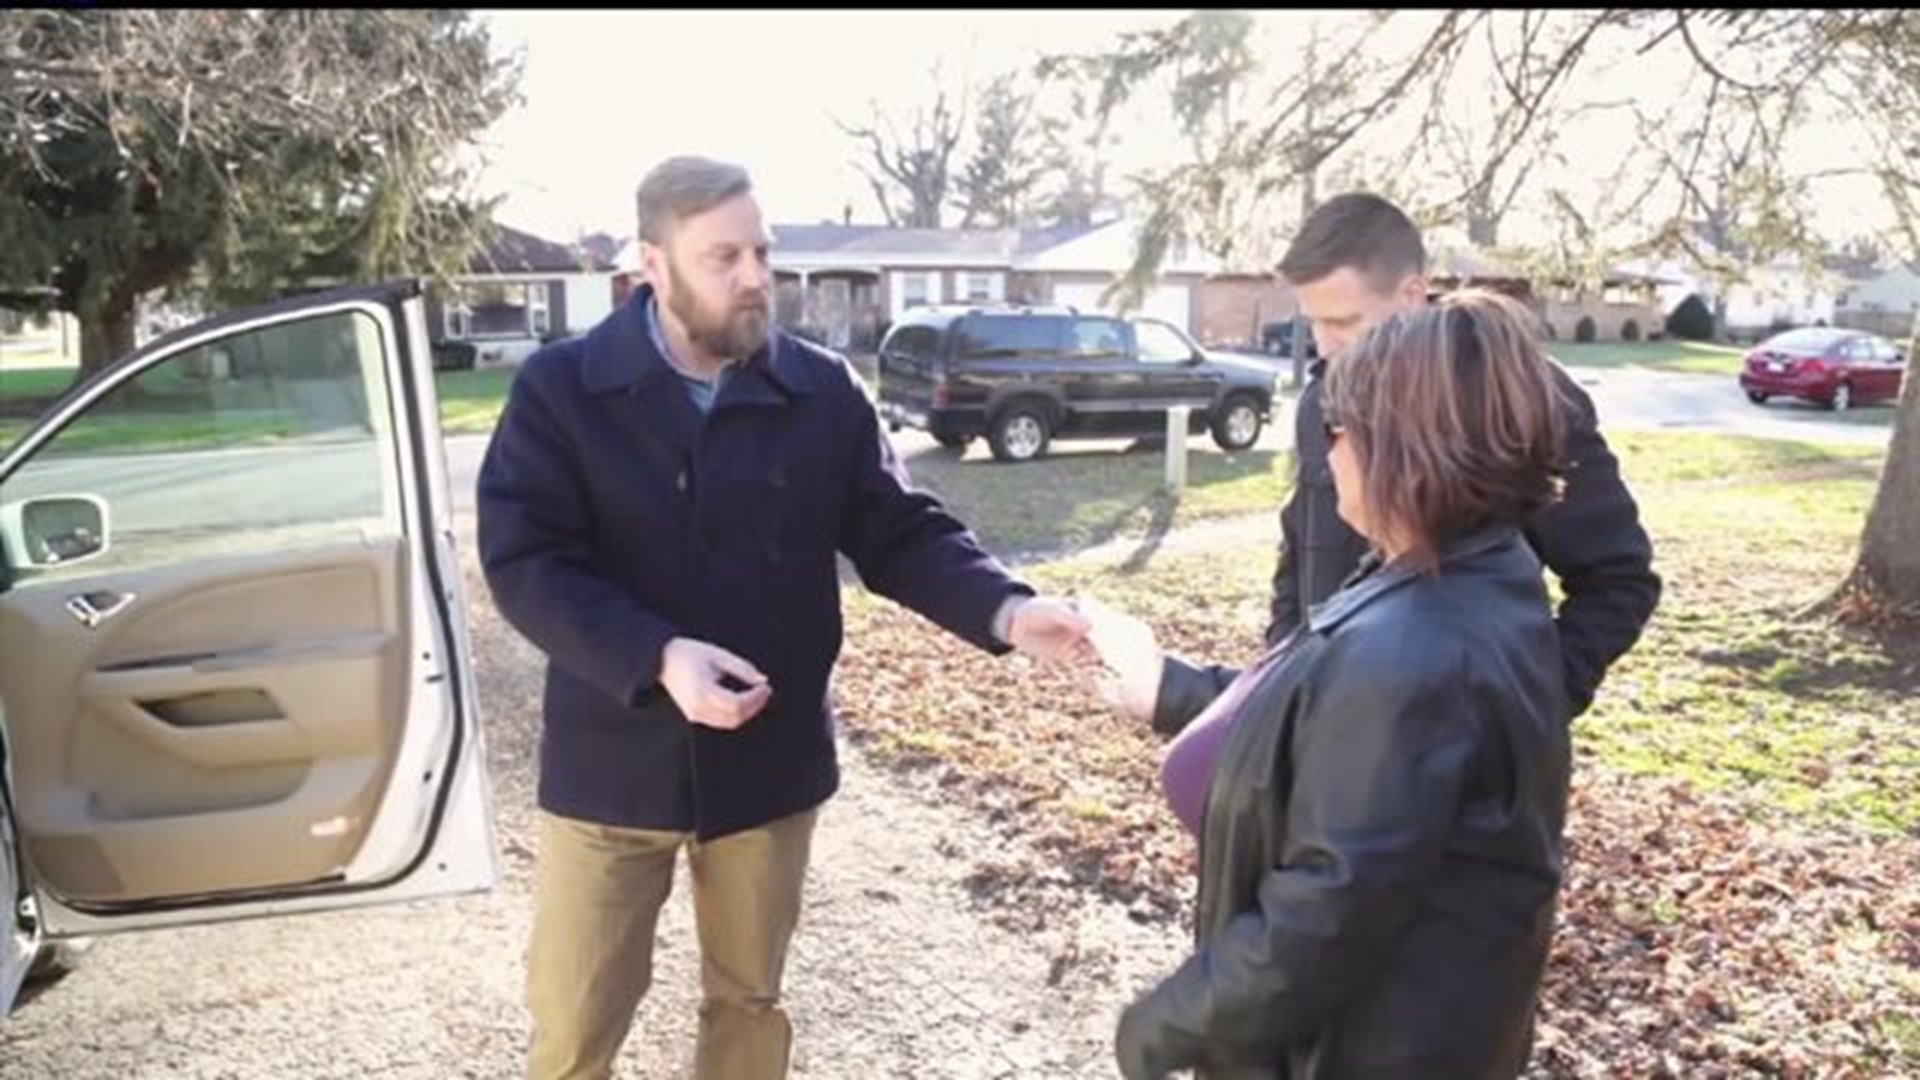 Galesburg church gives vans to family in need